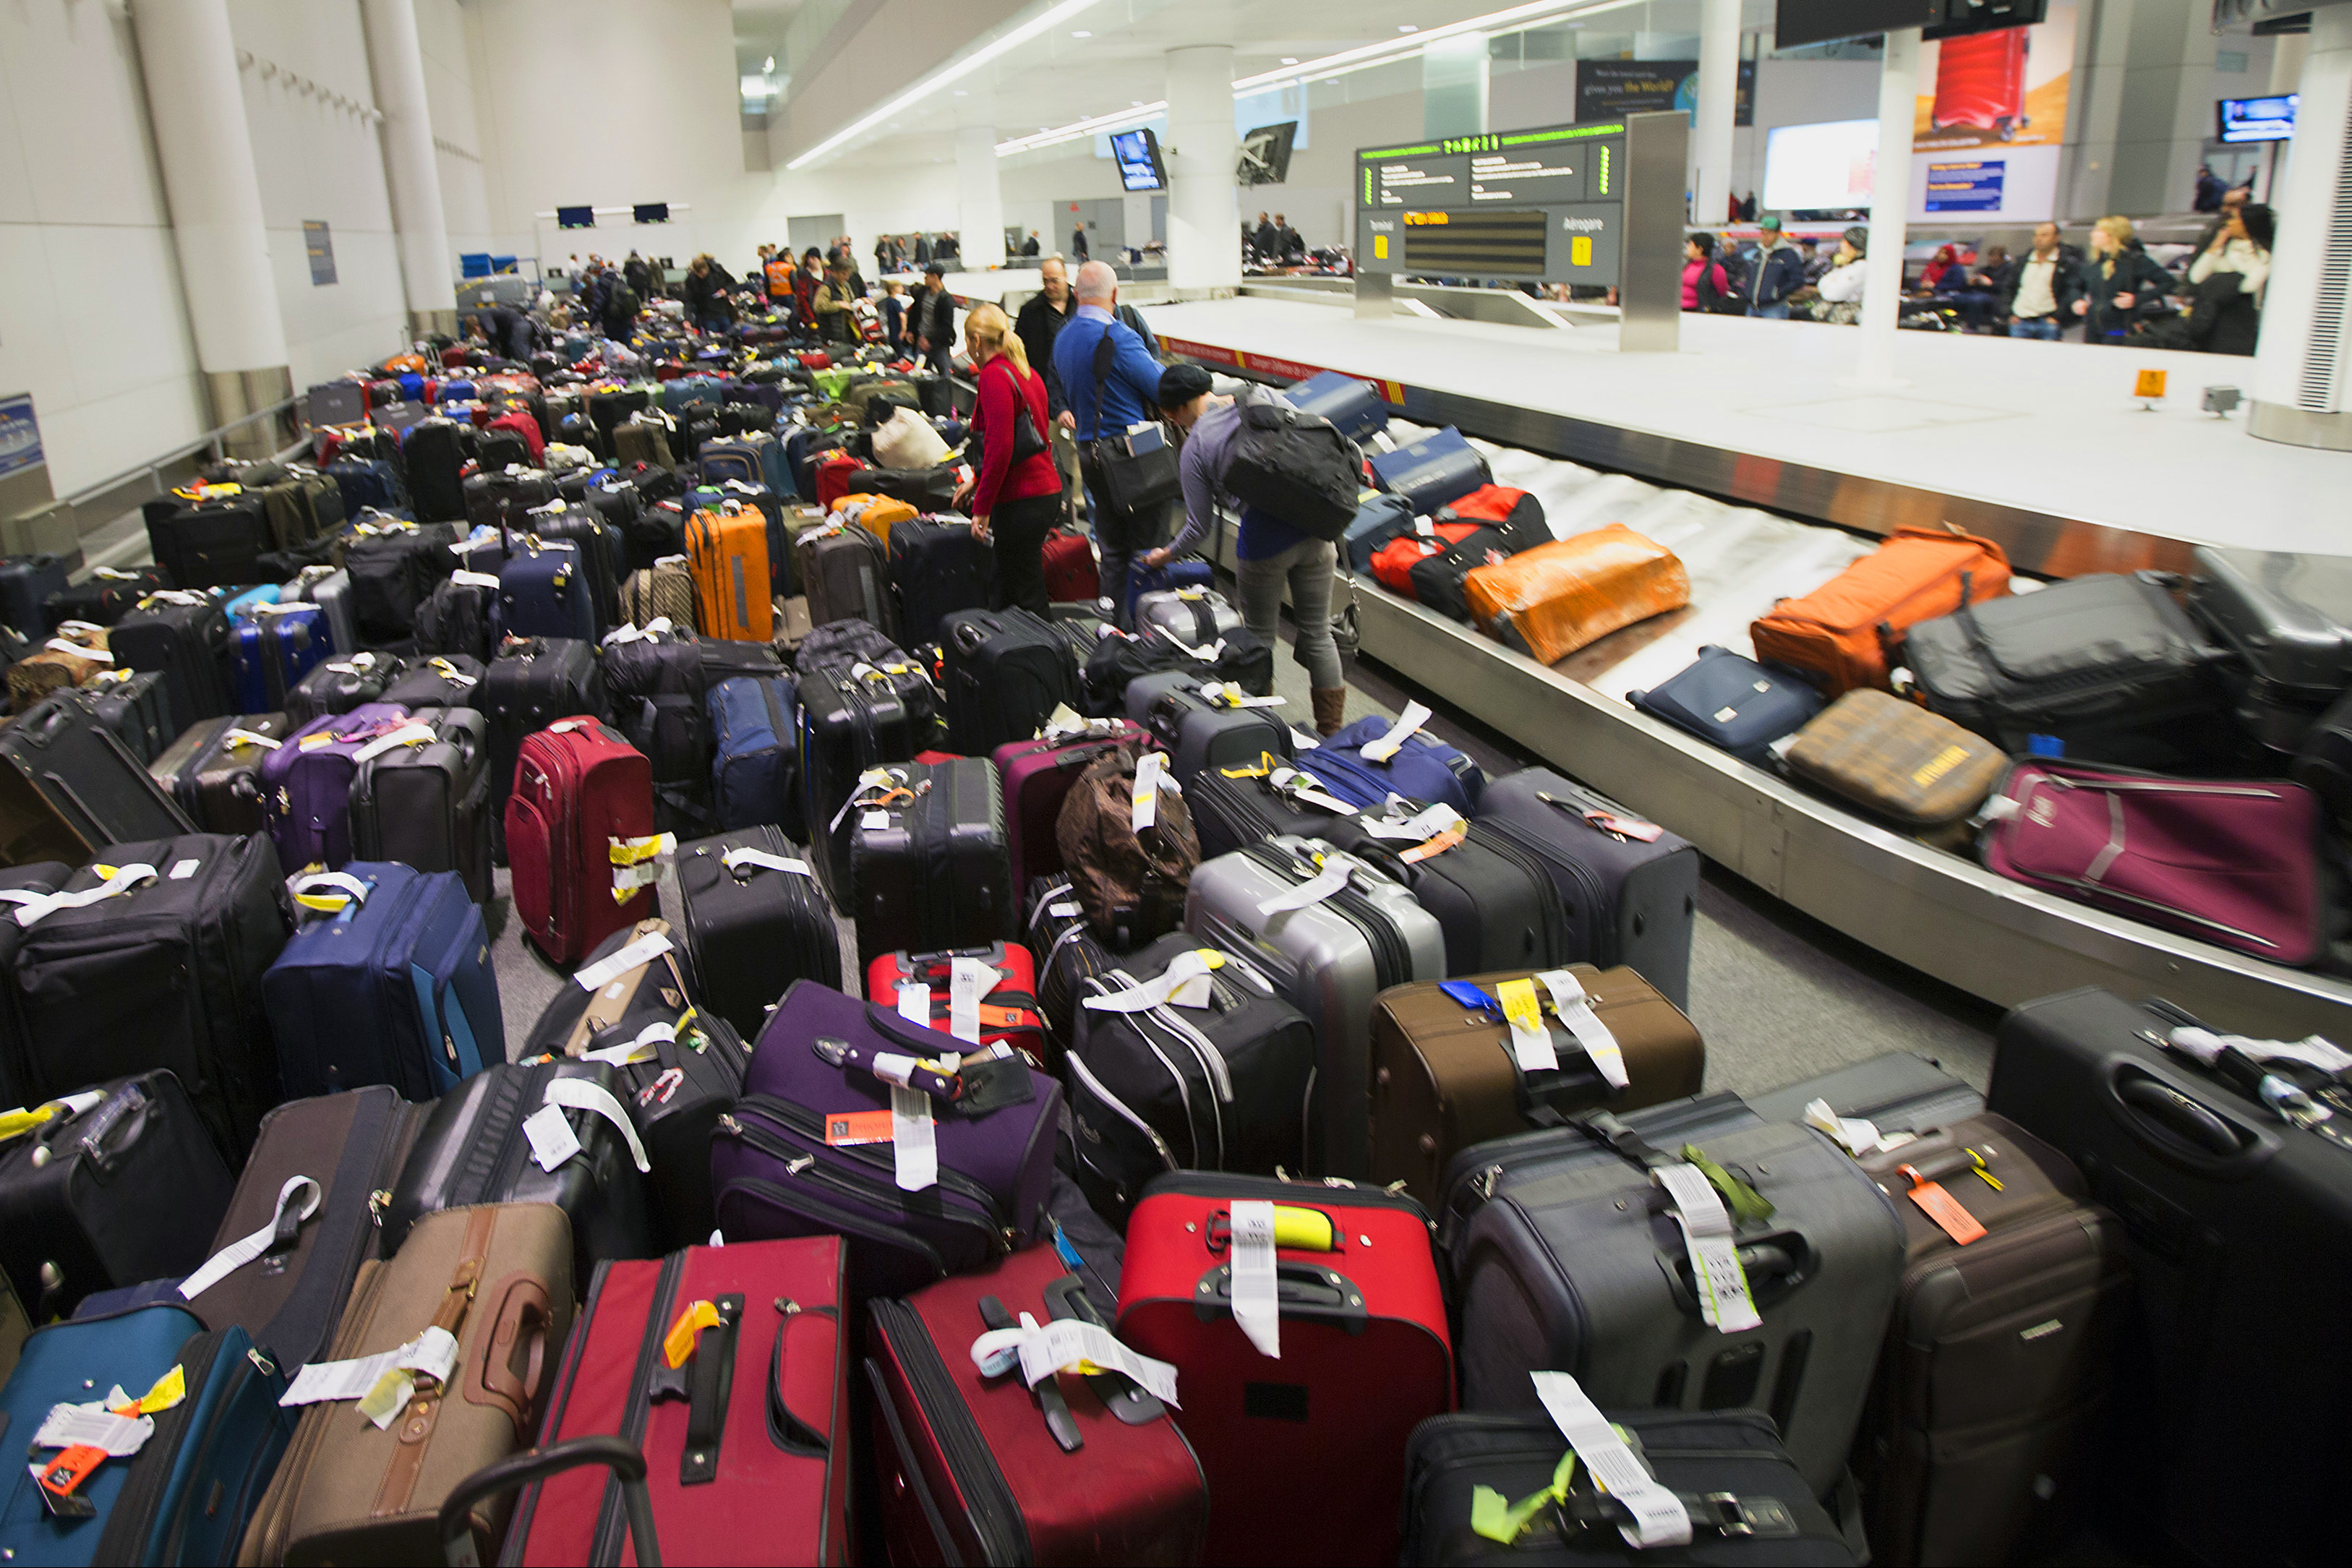 American Airlines promises to find your bags